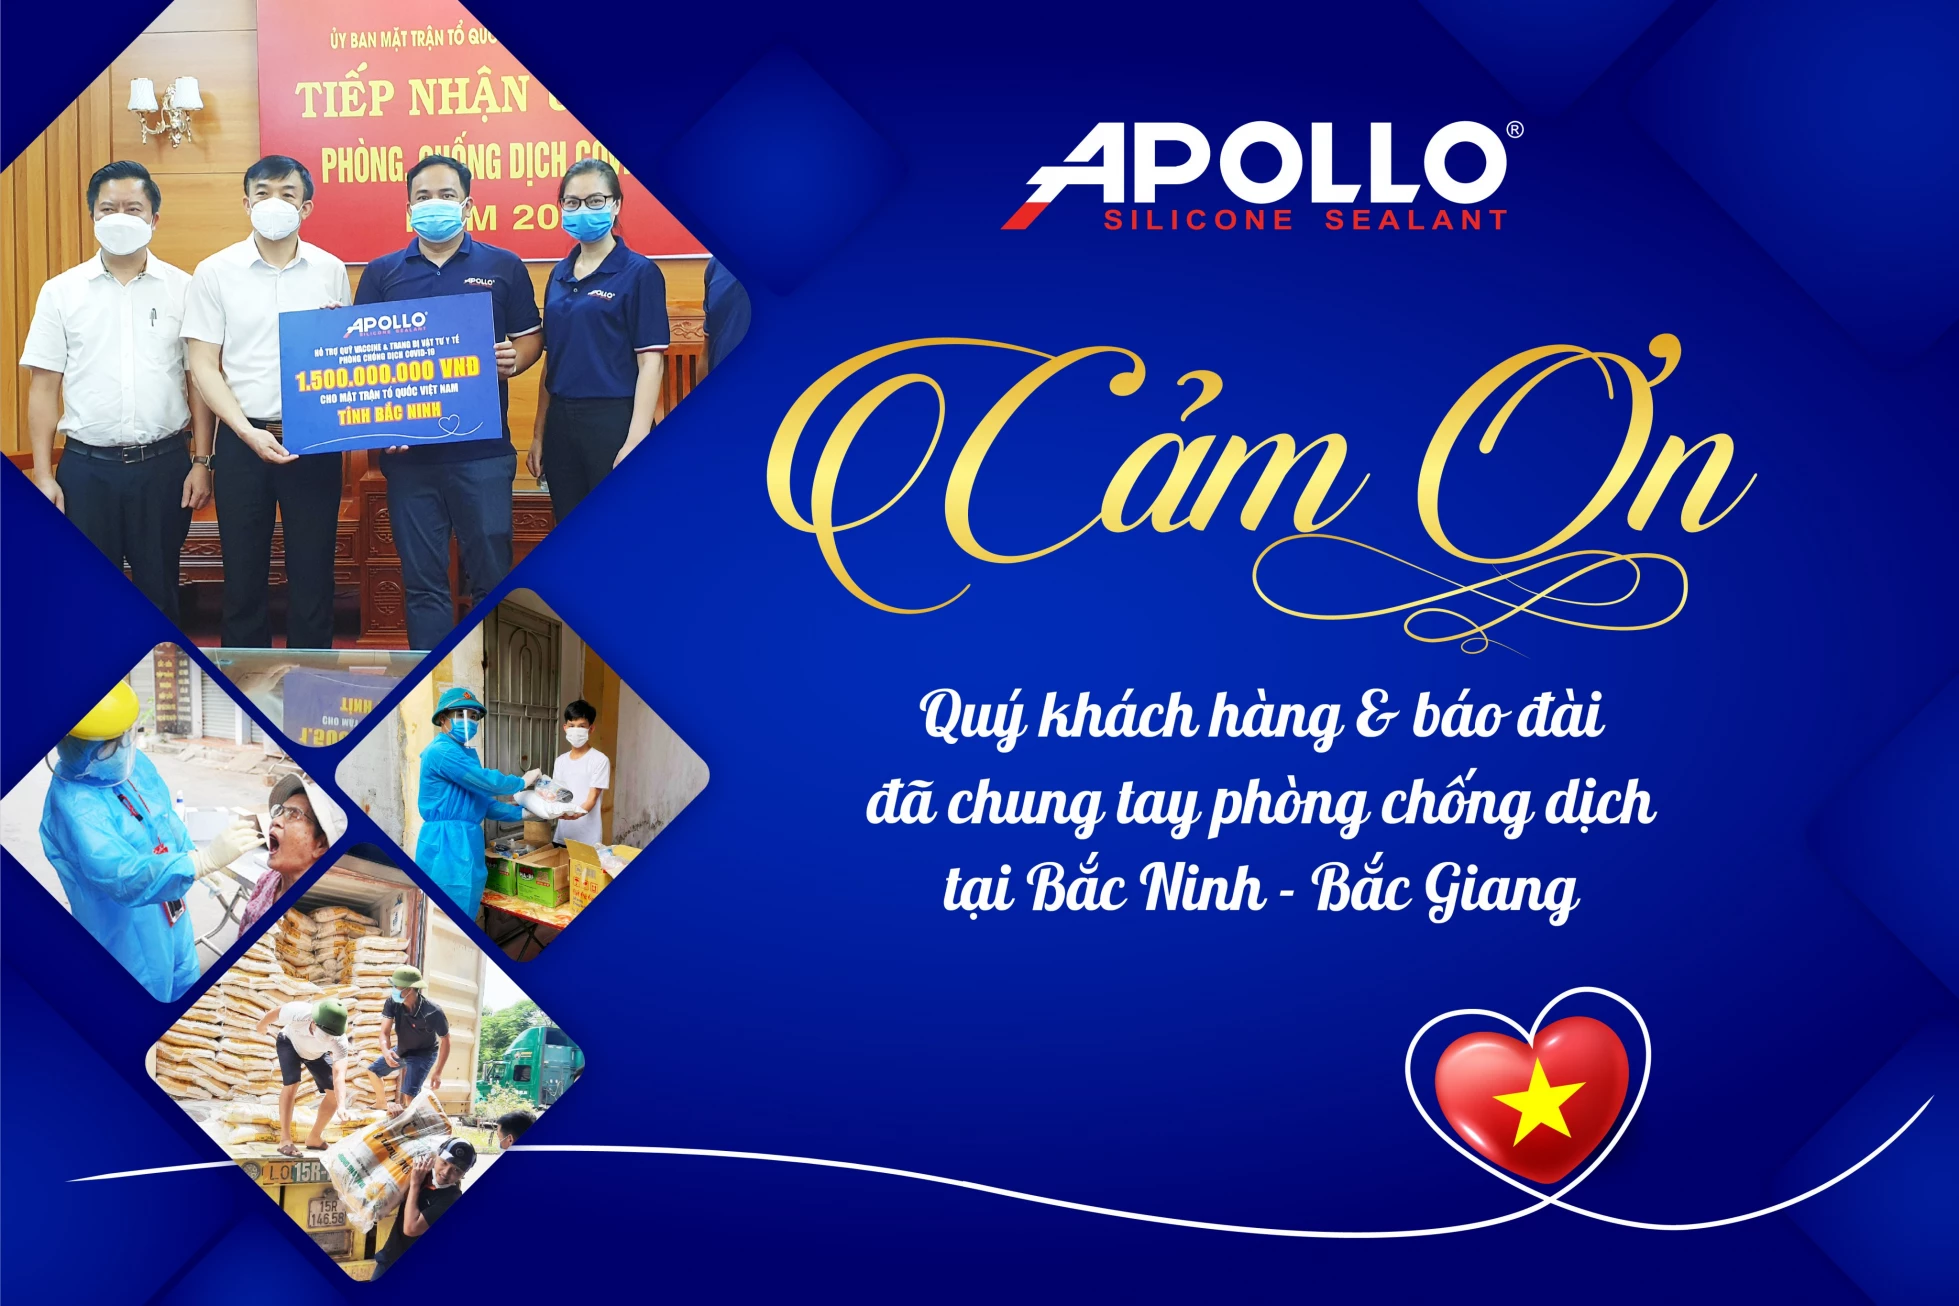 Apollo Silicone launched the program Connect Million Hearts - Join hands to prevent epidemic to Bac Giang - Bac Ninh